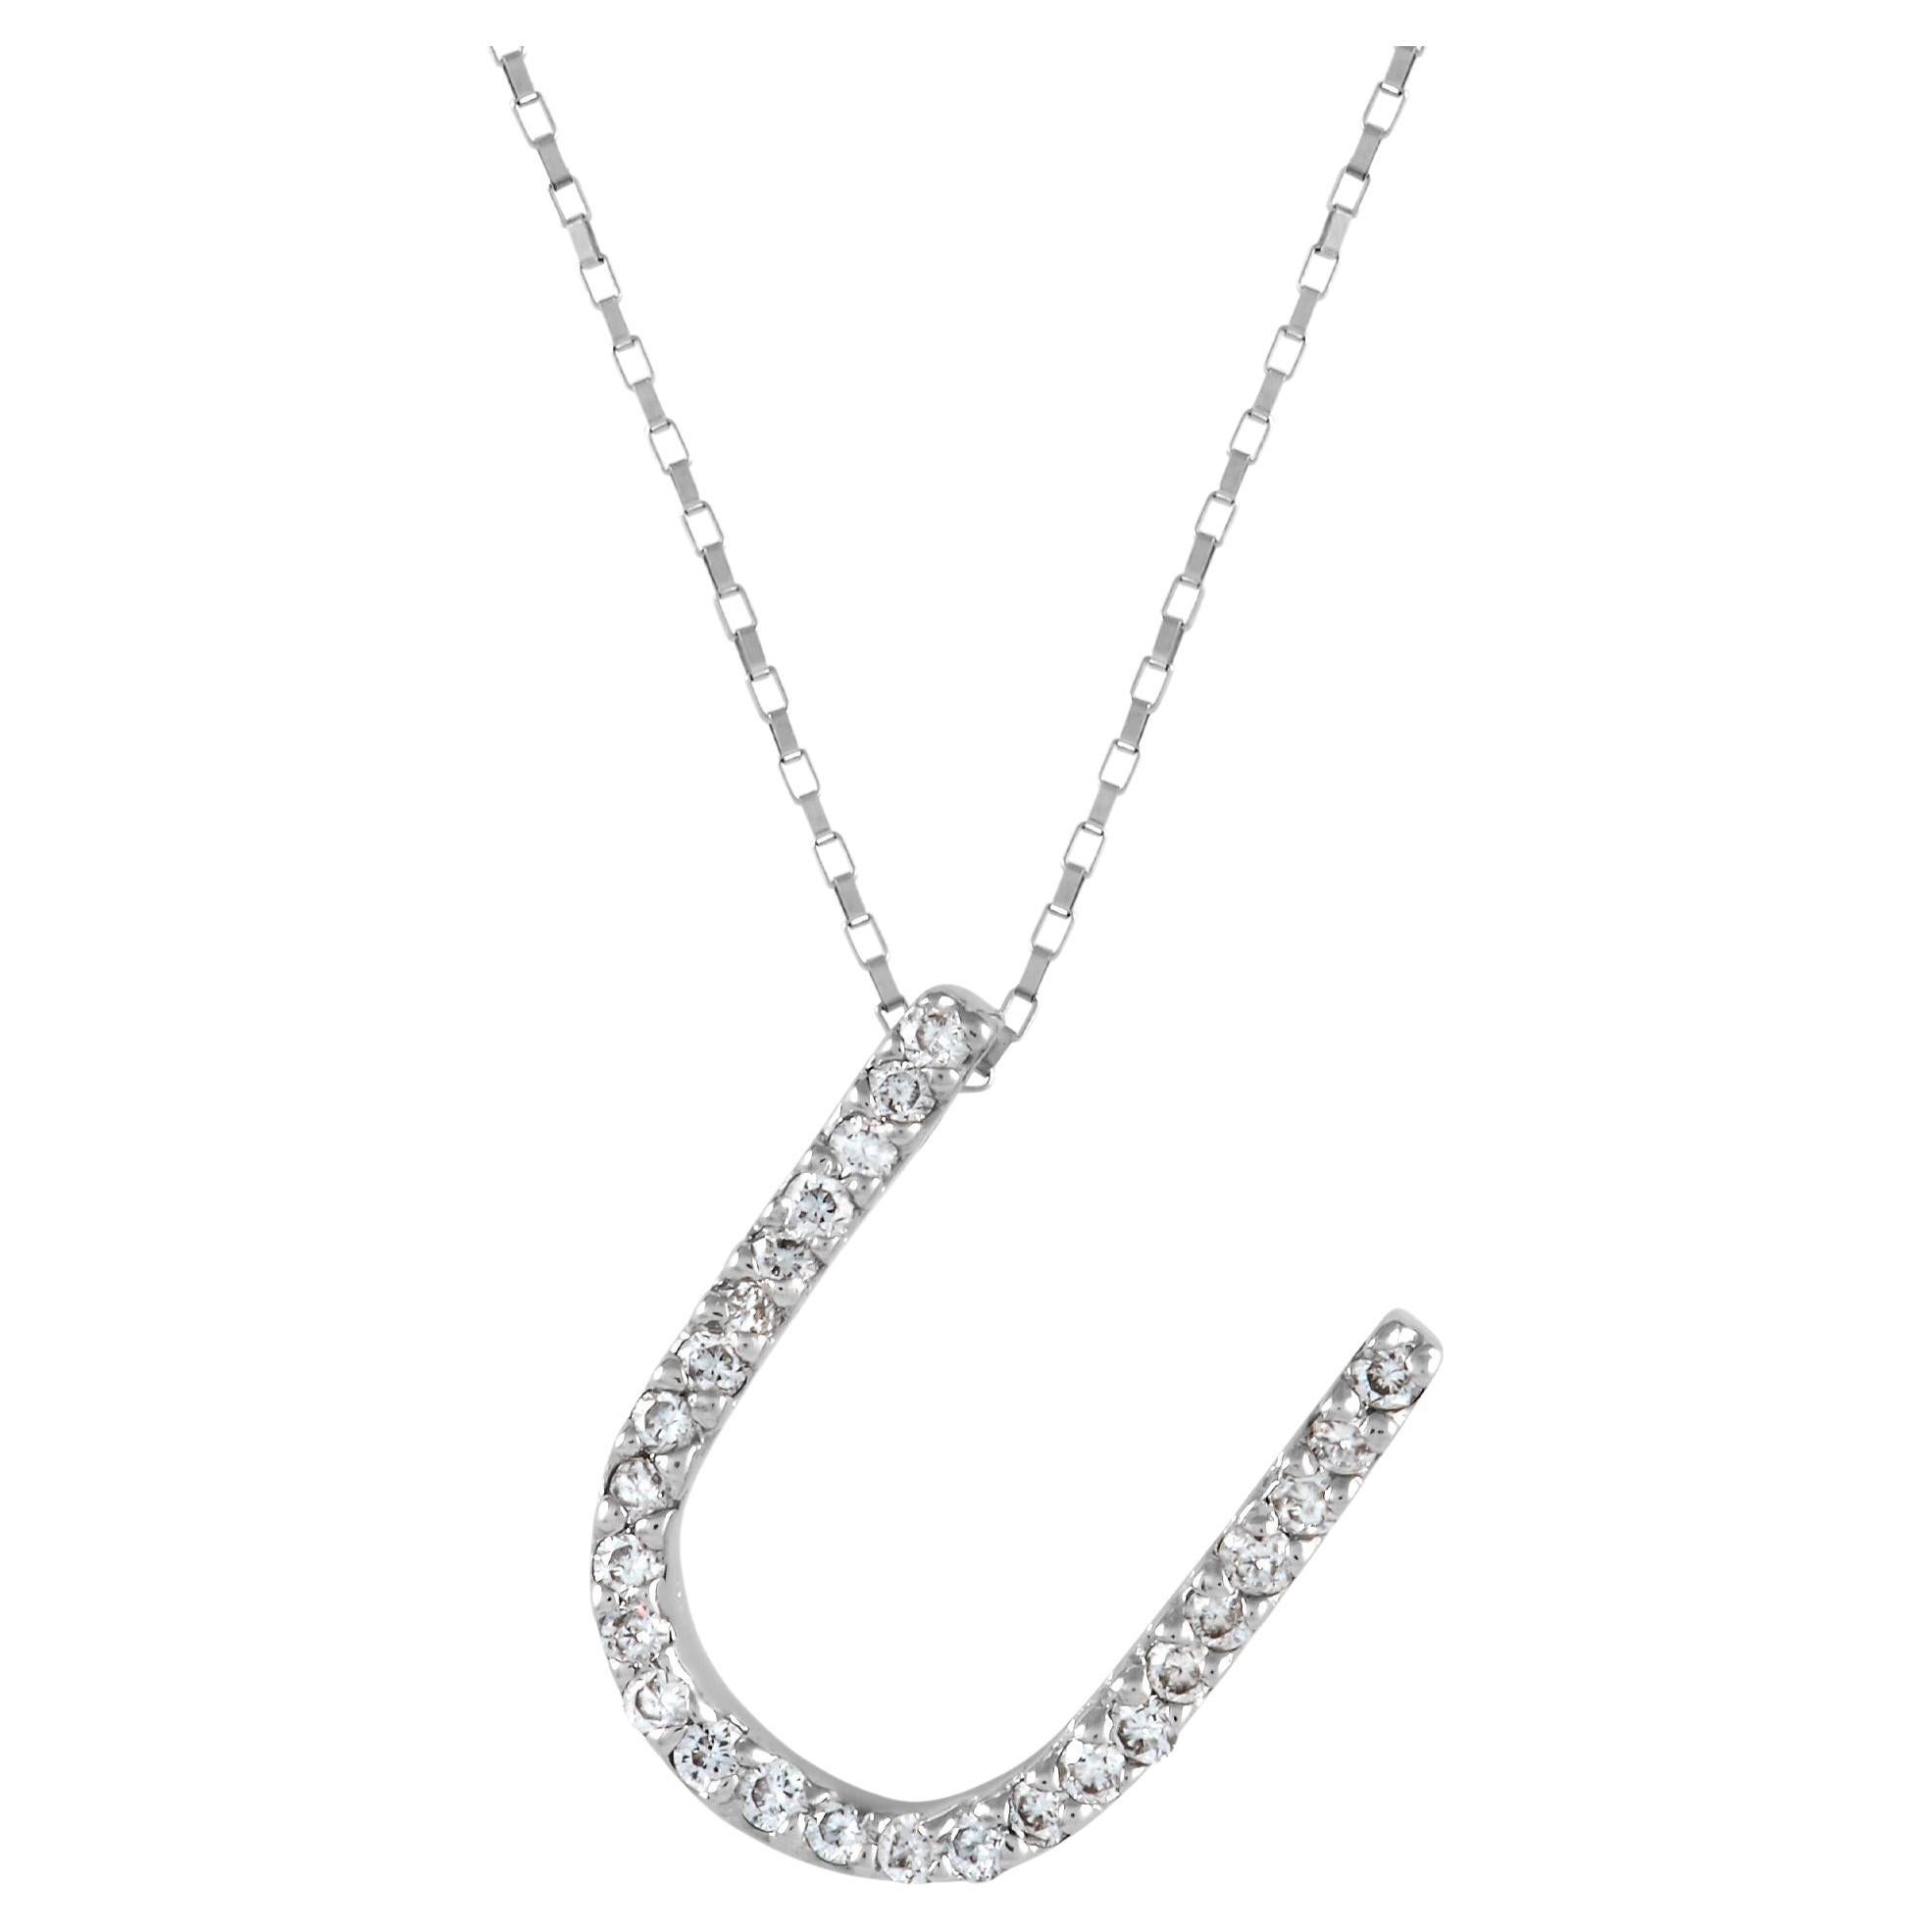 LB Exclusive 14K White Gold 0.17 Ct Diamond “U” Initial Necklace For Sale